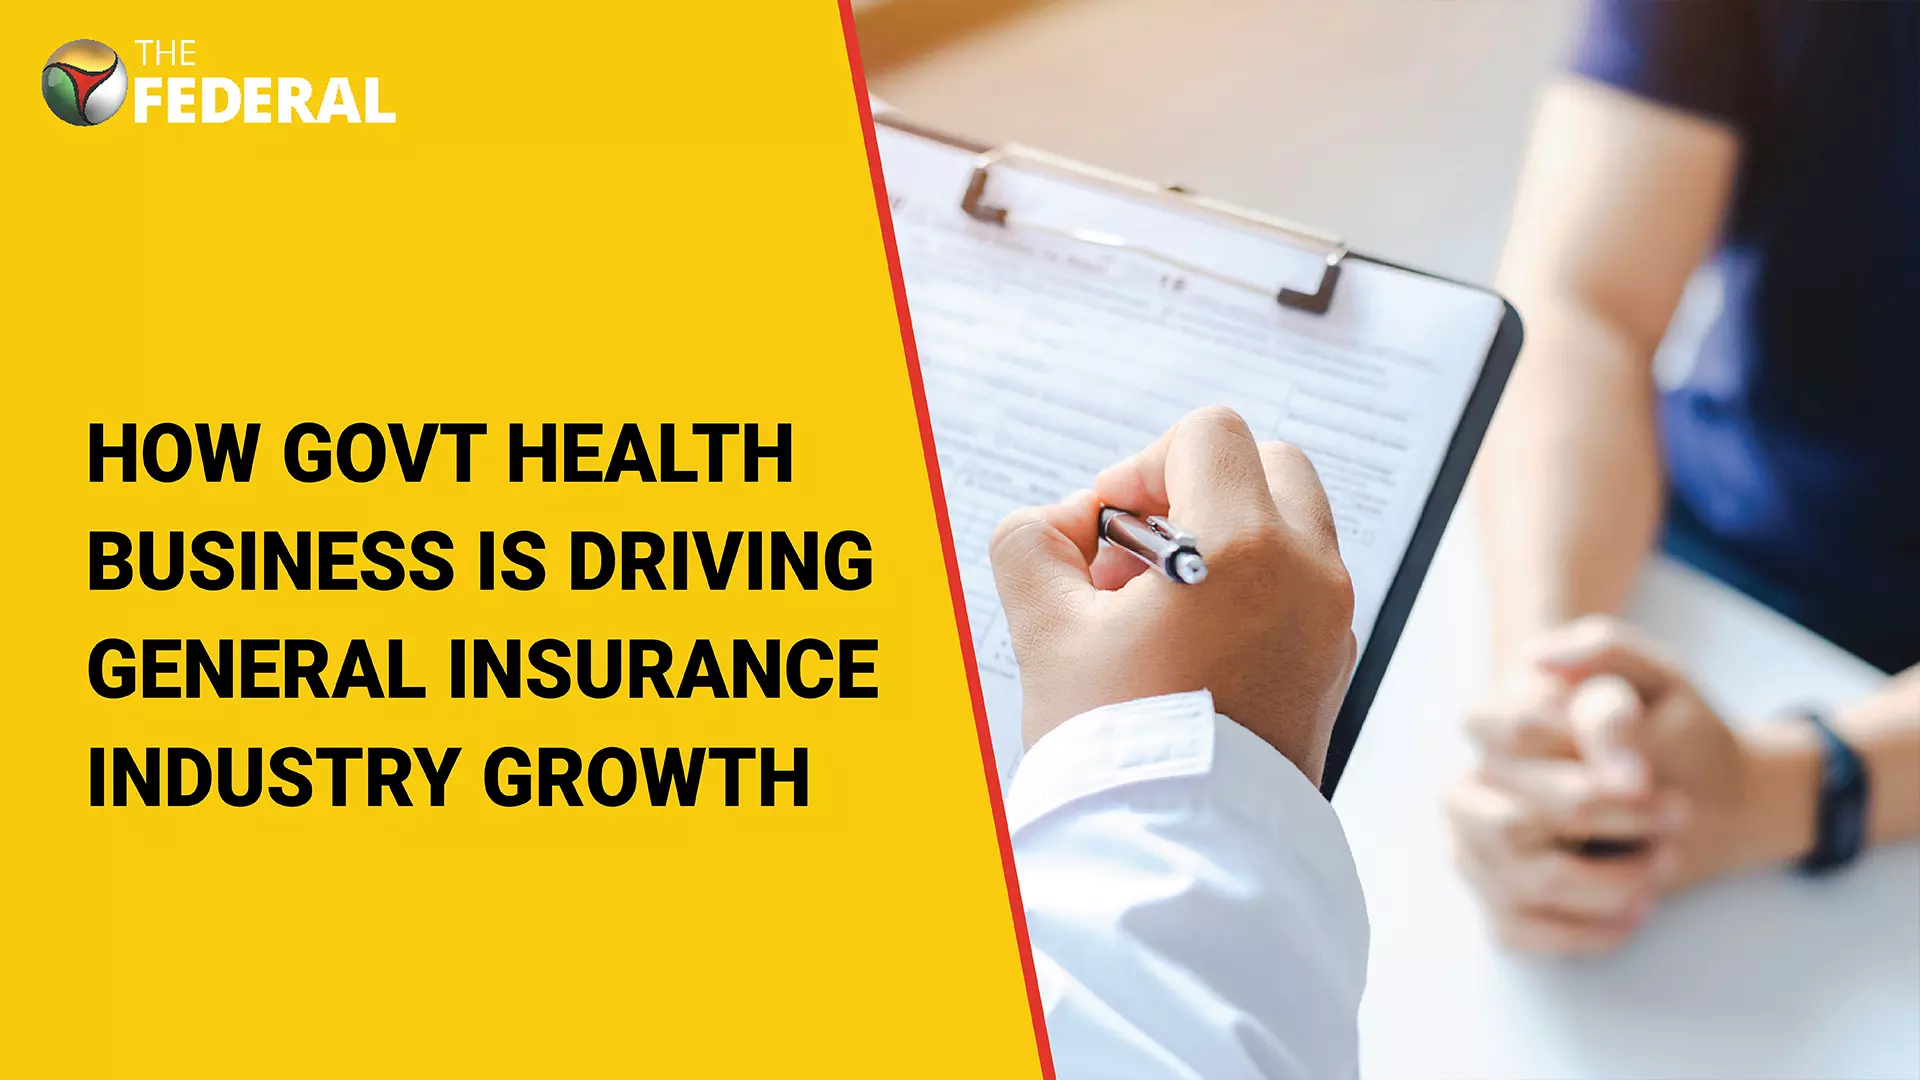 How govt health business is driving general insurance industry growth